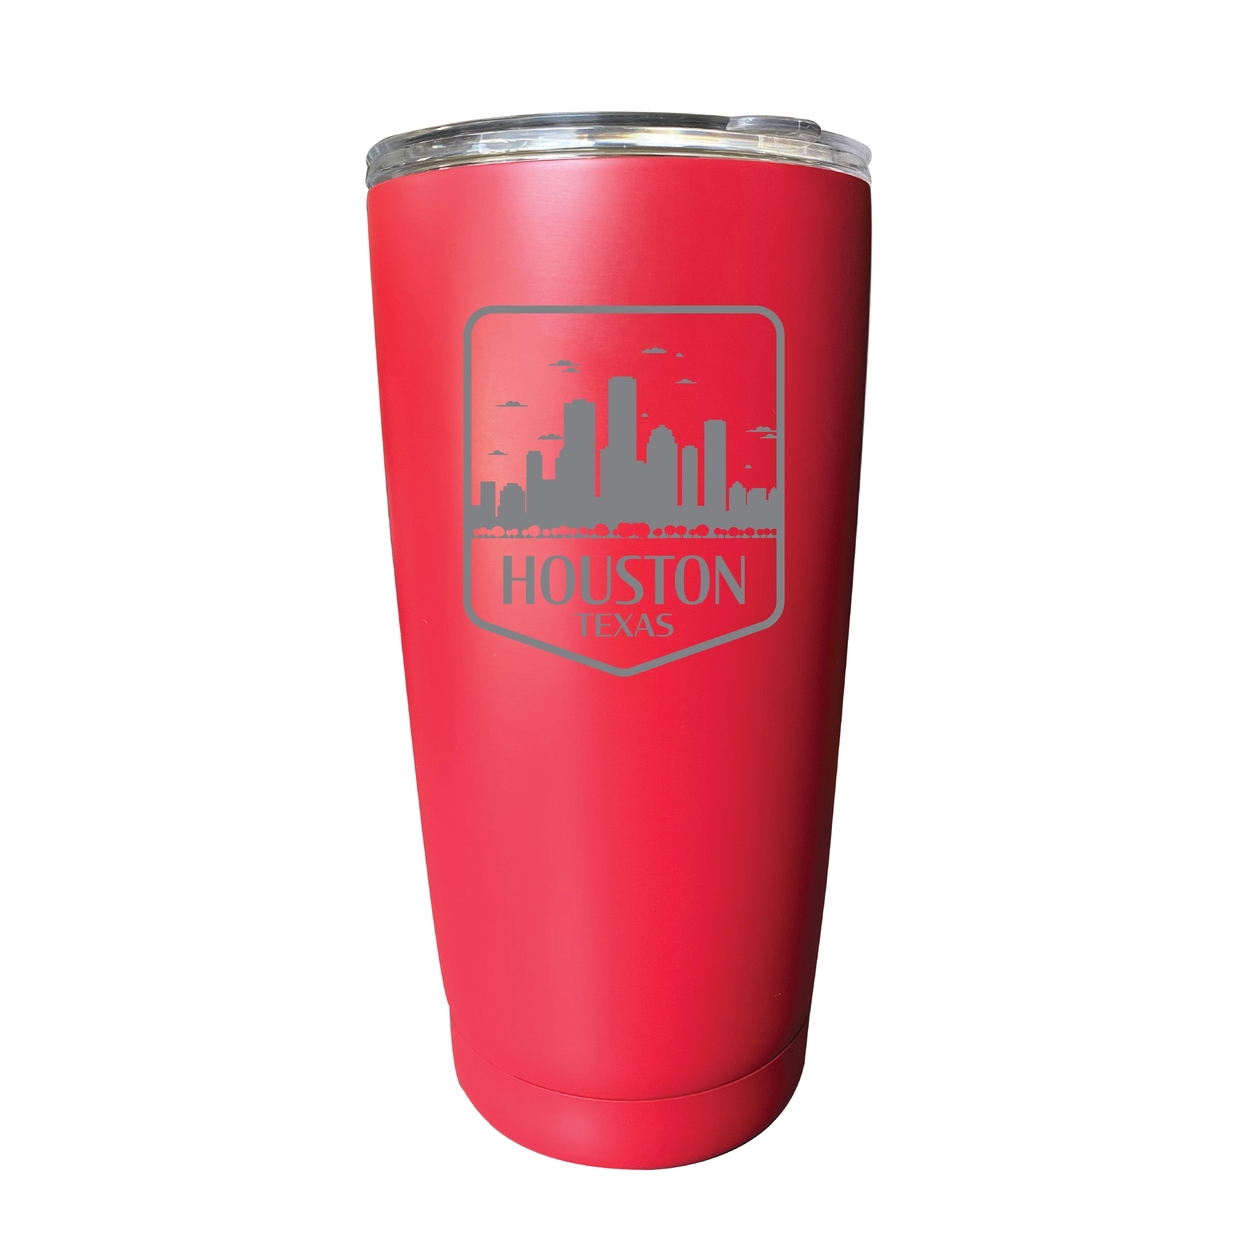 Houston Texas Souvenir 16 Oz Engraved Stainless Steel Insulated Tumbler - Pink,,2-Pack